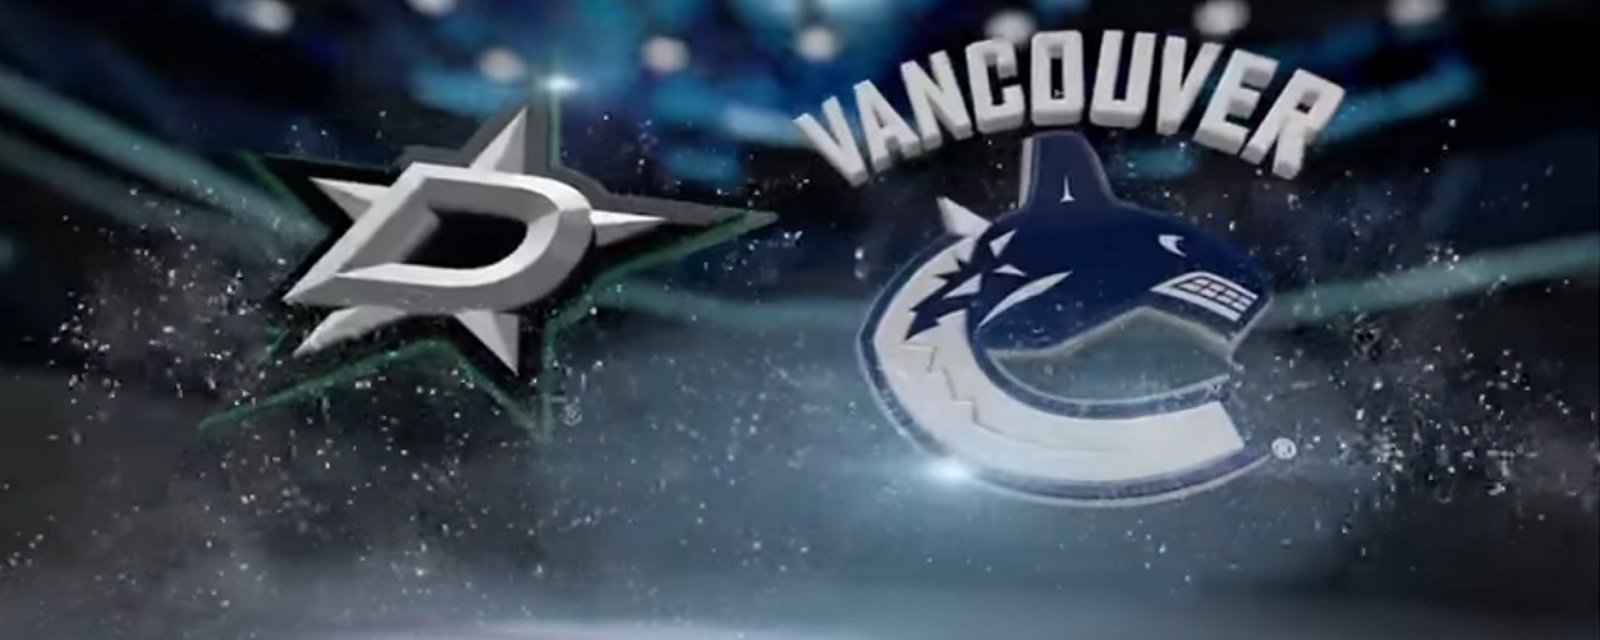 Rumors of a huge deal between the Canucks and Stars.